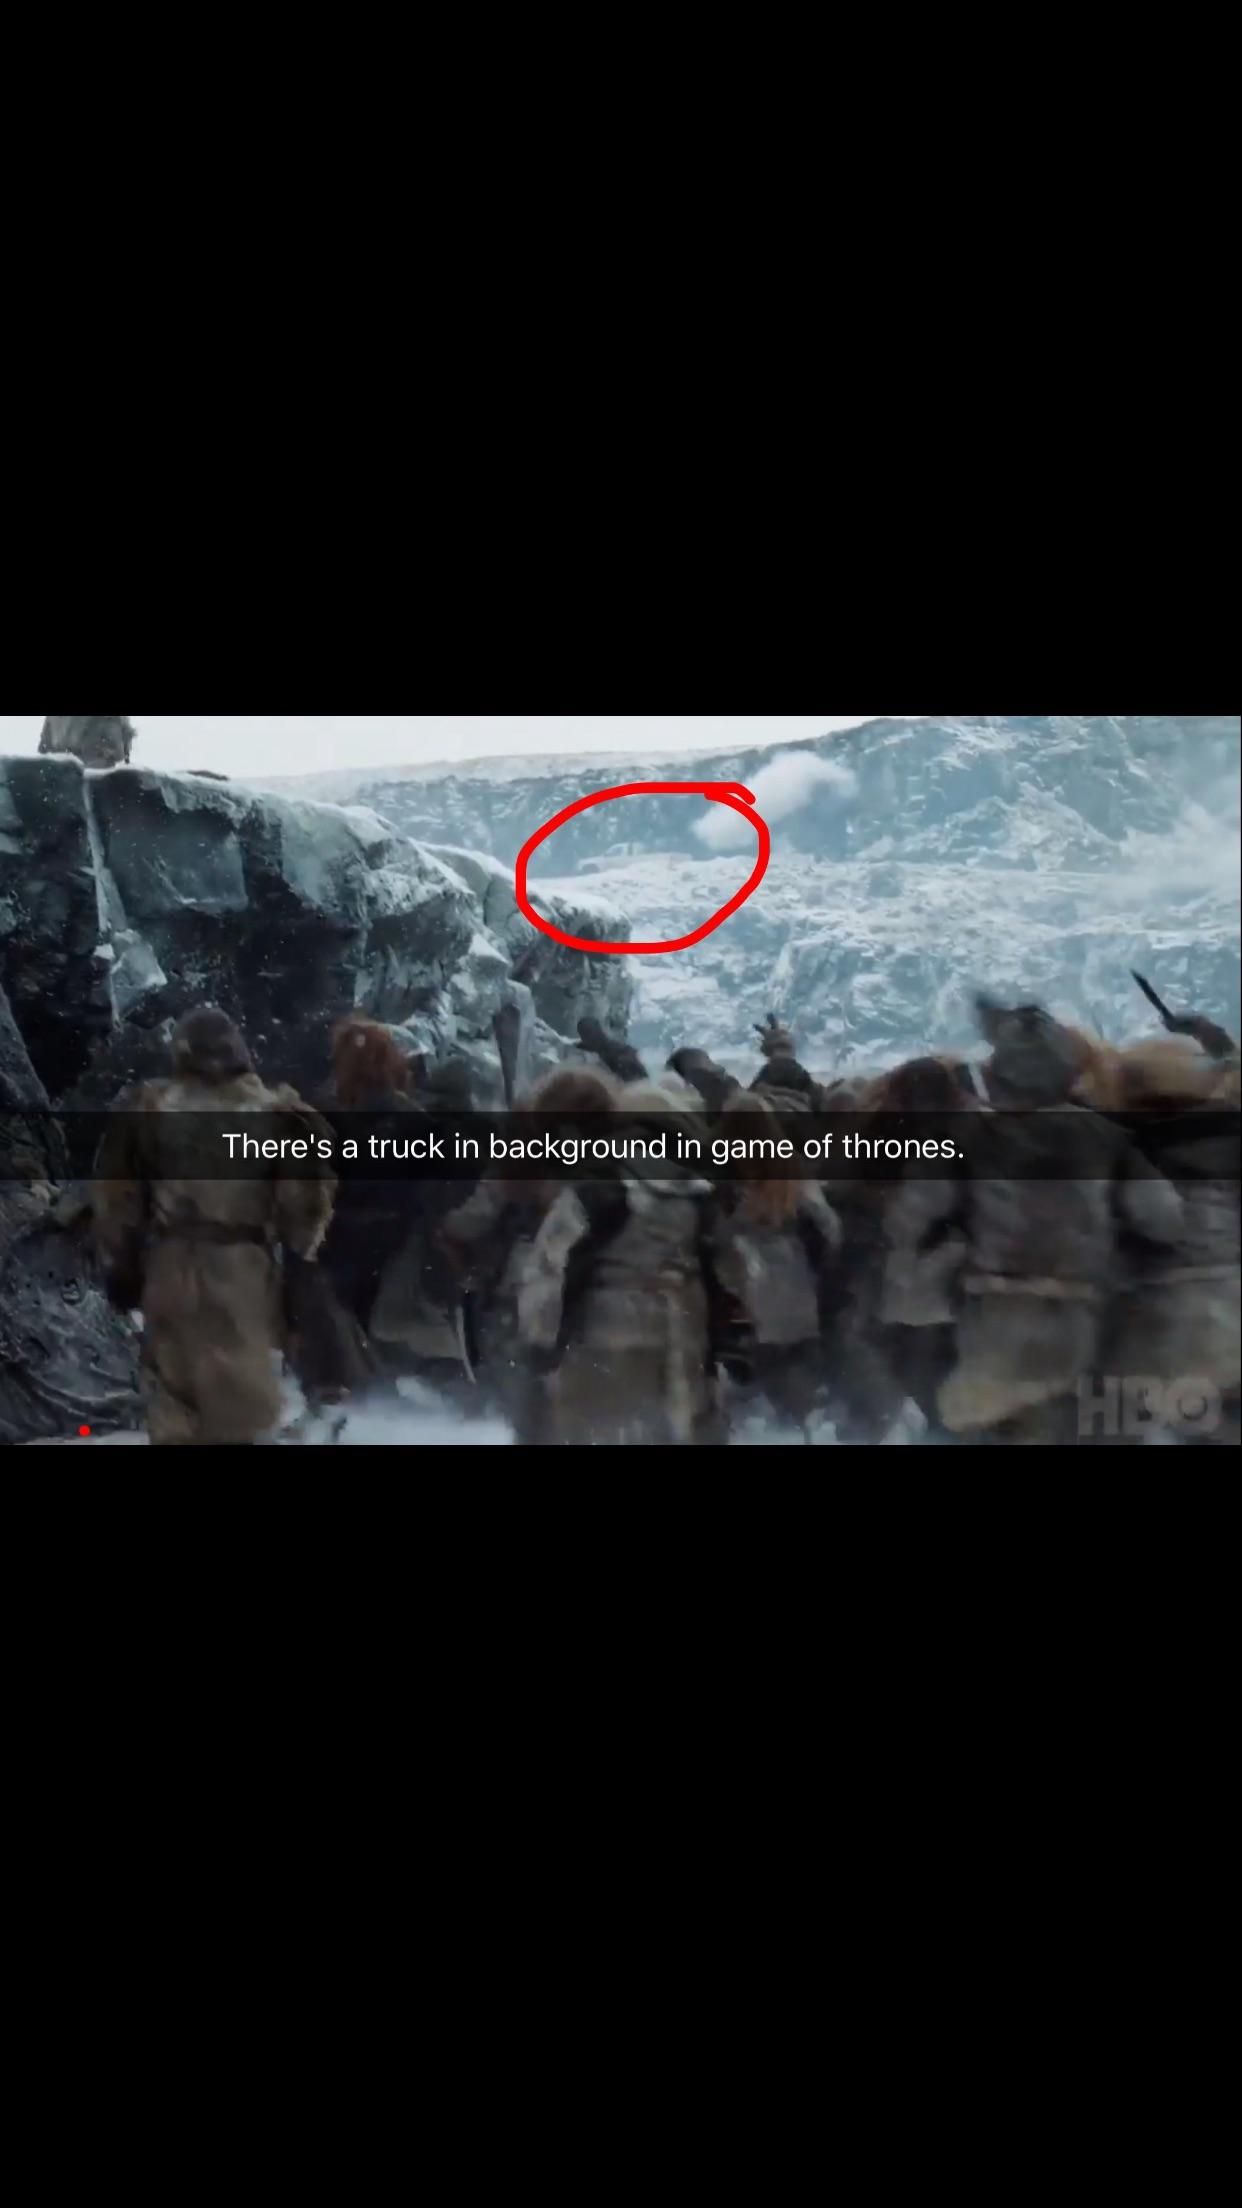 Brother found a pickup truck in the background of Game of Thrones